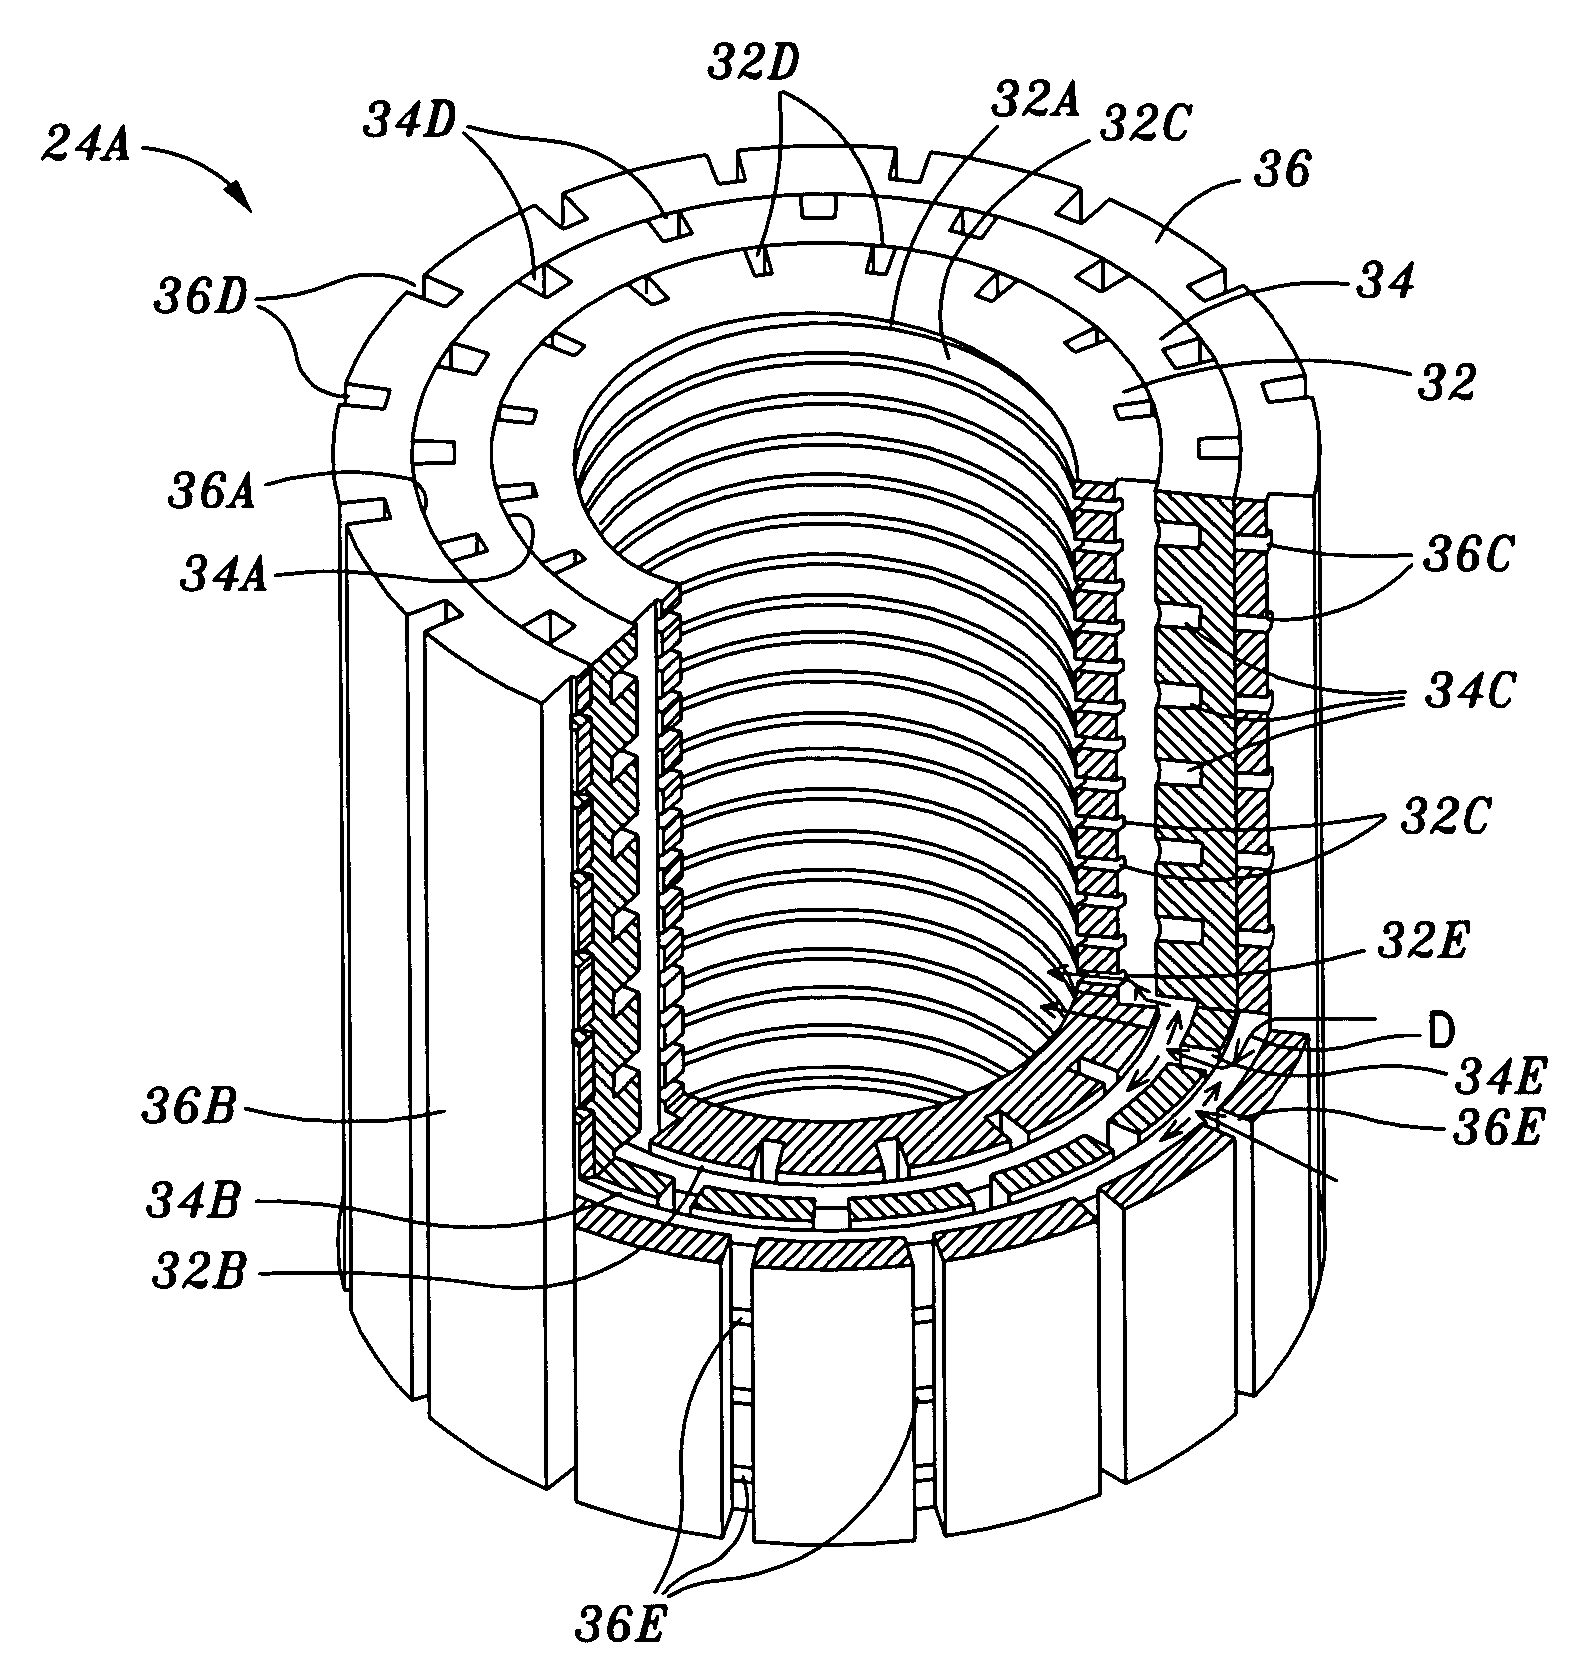 Throttle device for high fluid pressures